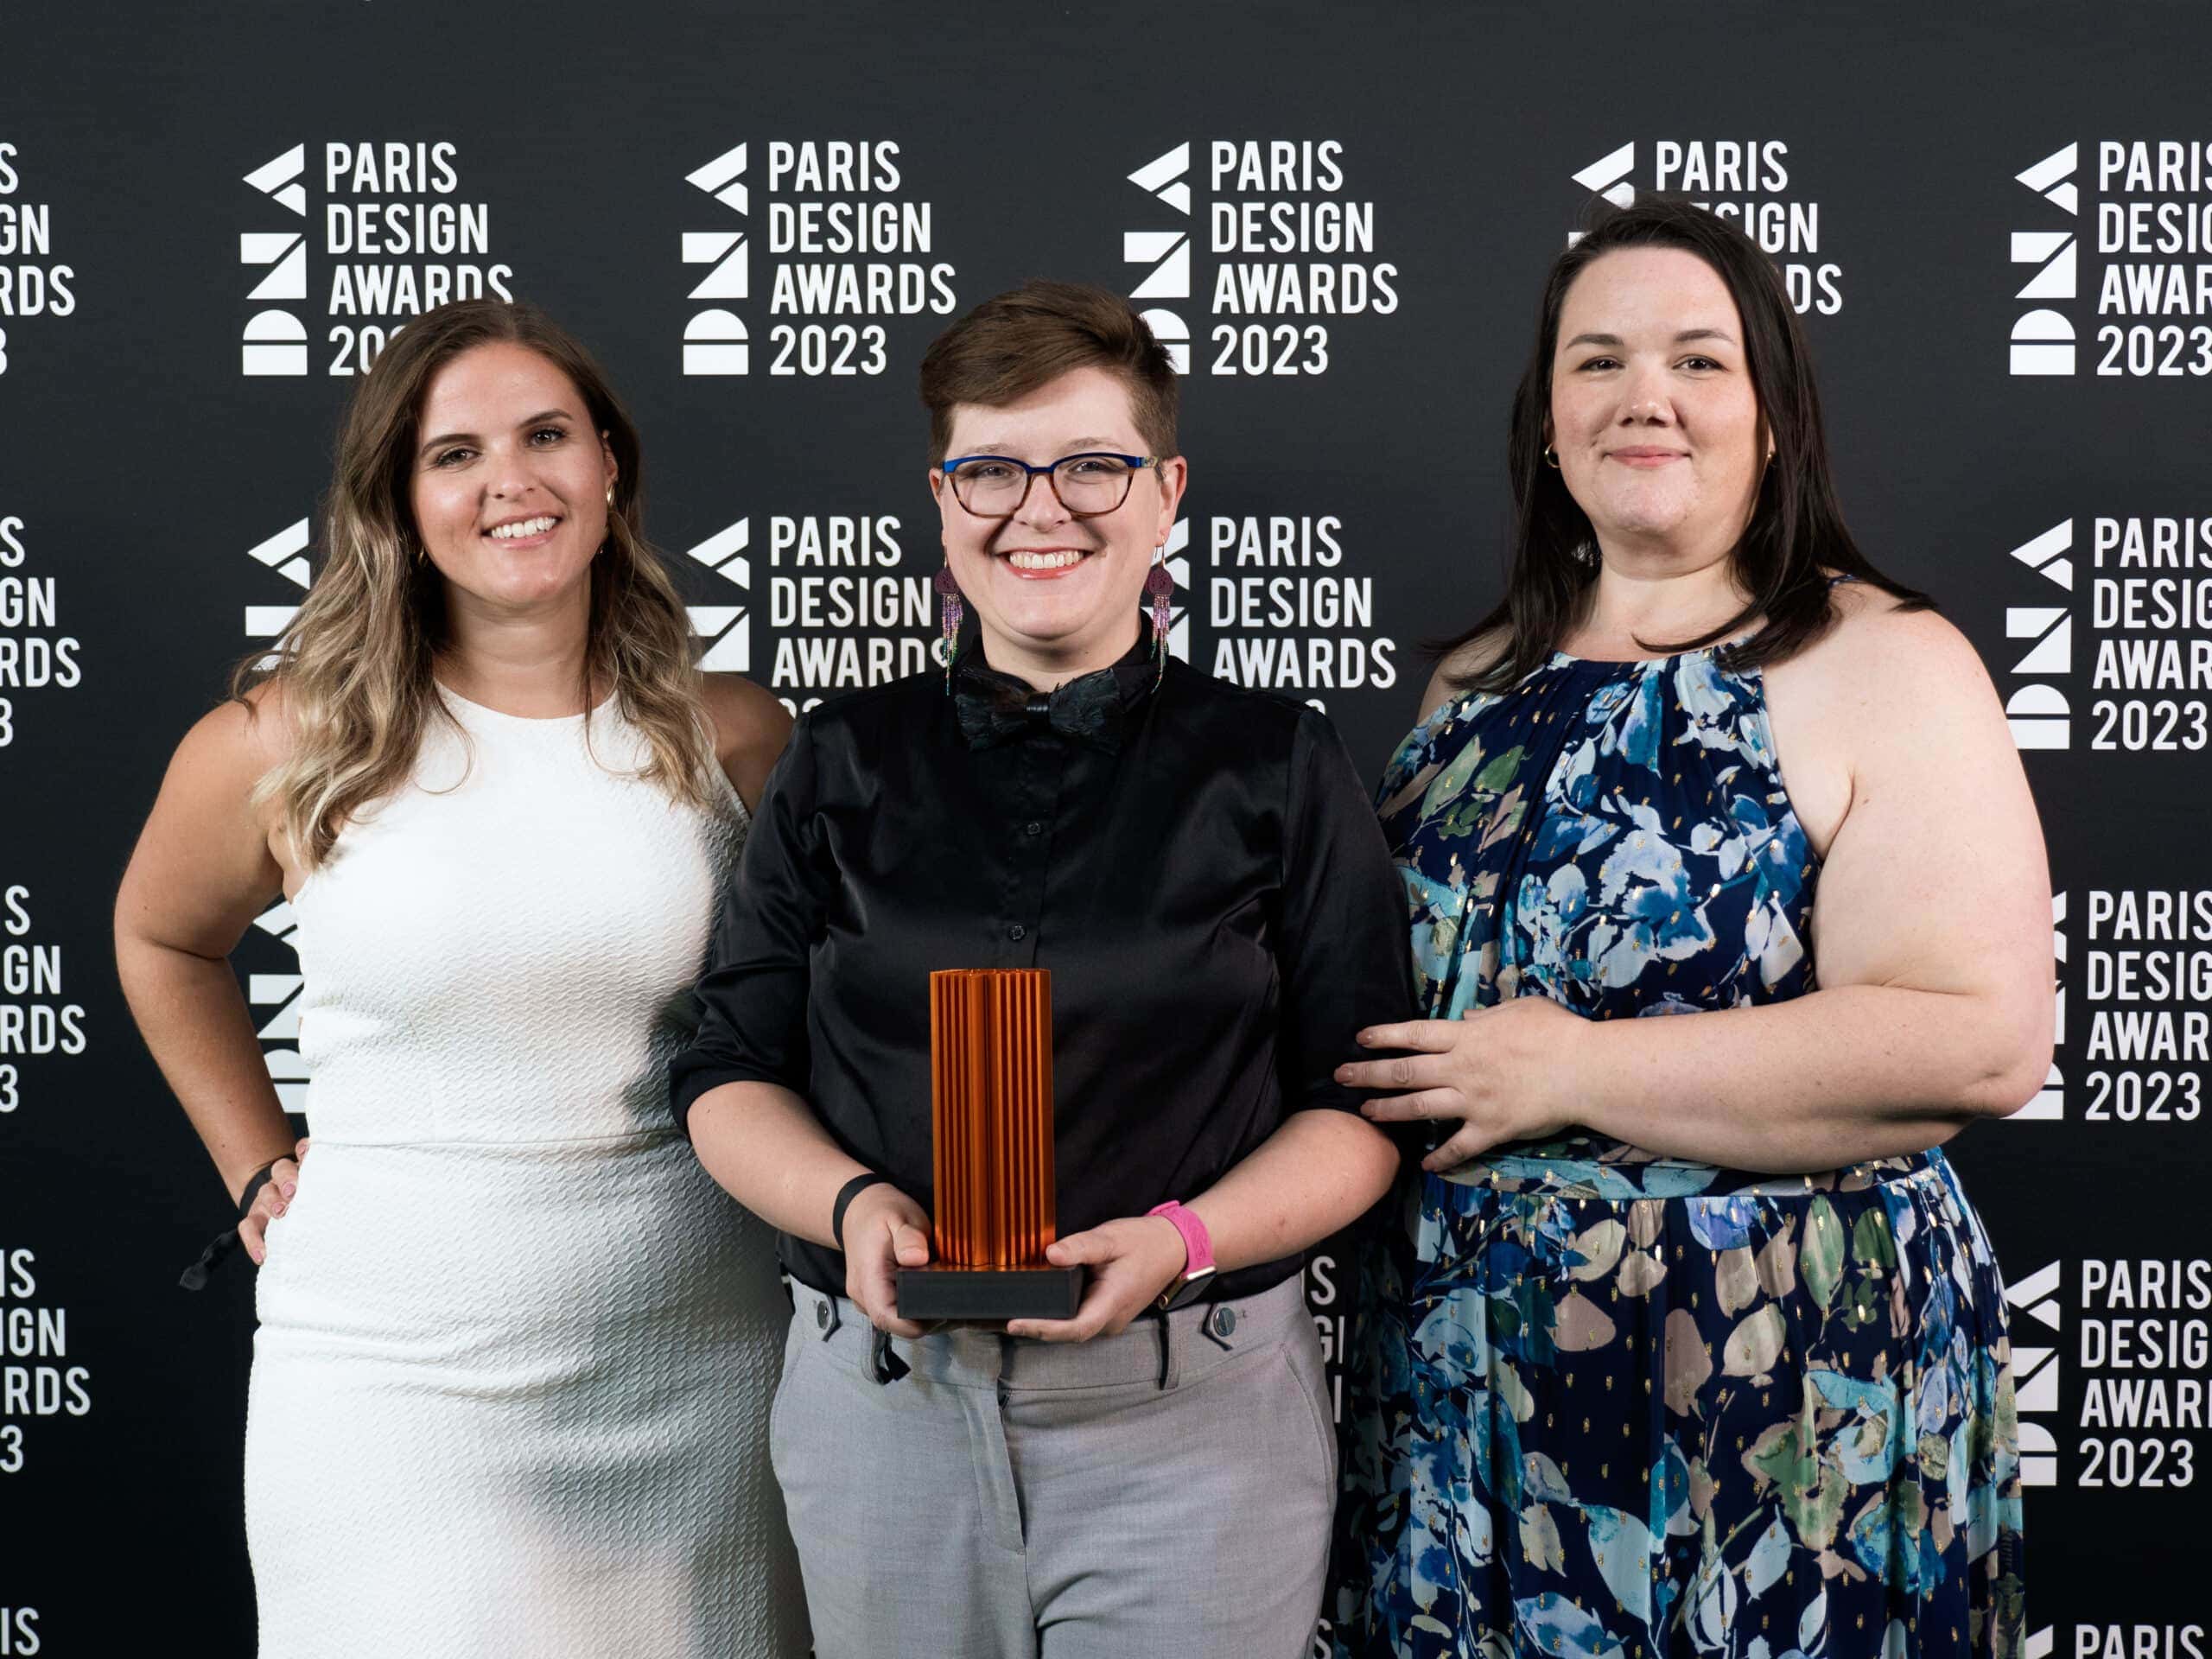 Jennica Robinson, Meggan Van Harten, and Jennifer Taback stand in front of a wall covered with the 'DNA Paris Design Awards 2023'. Meggan stands in the middle holding the award in her hands.